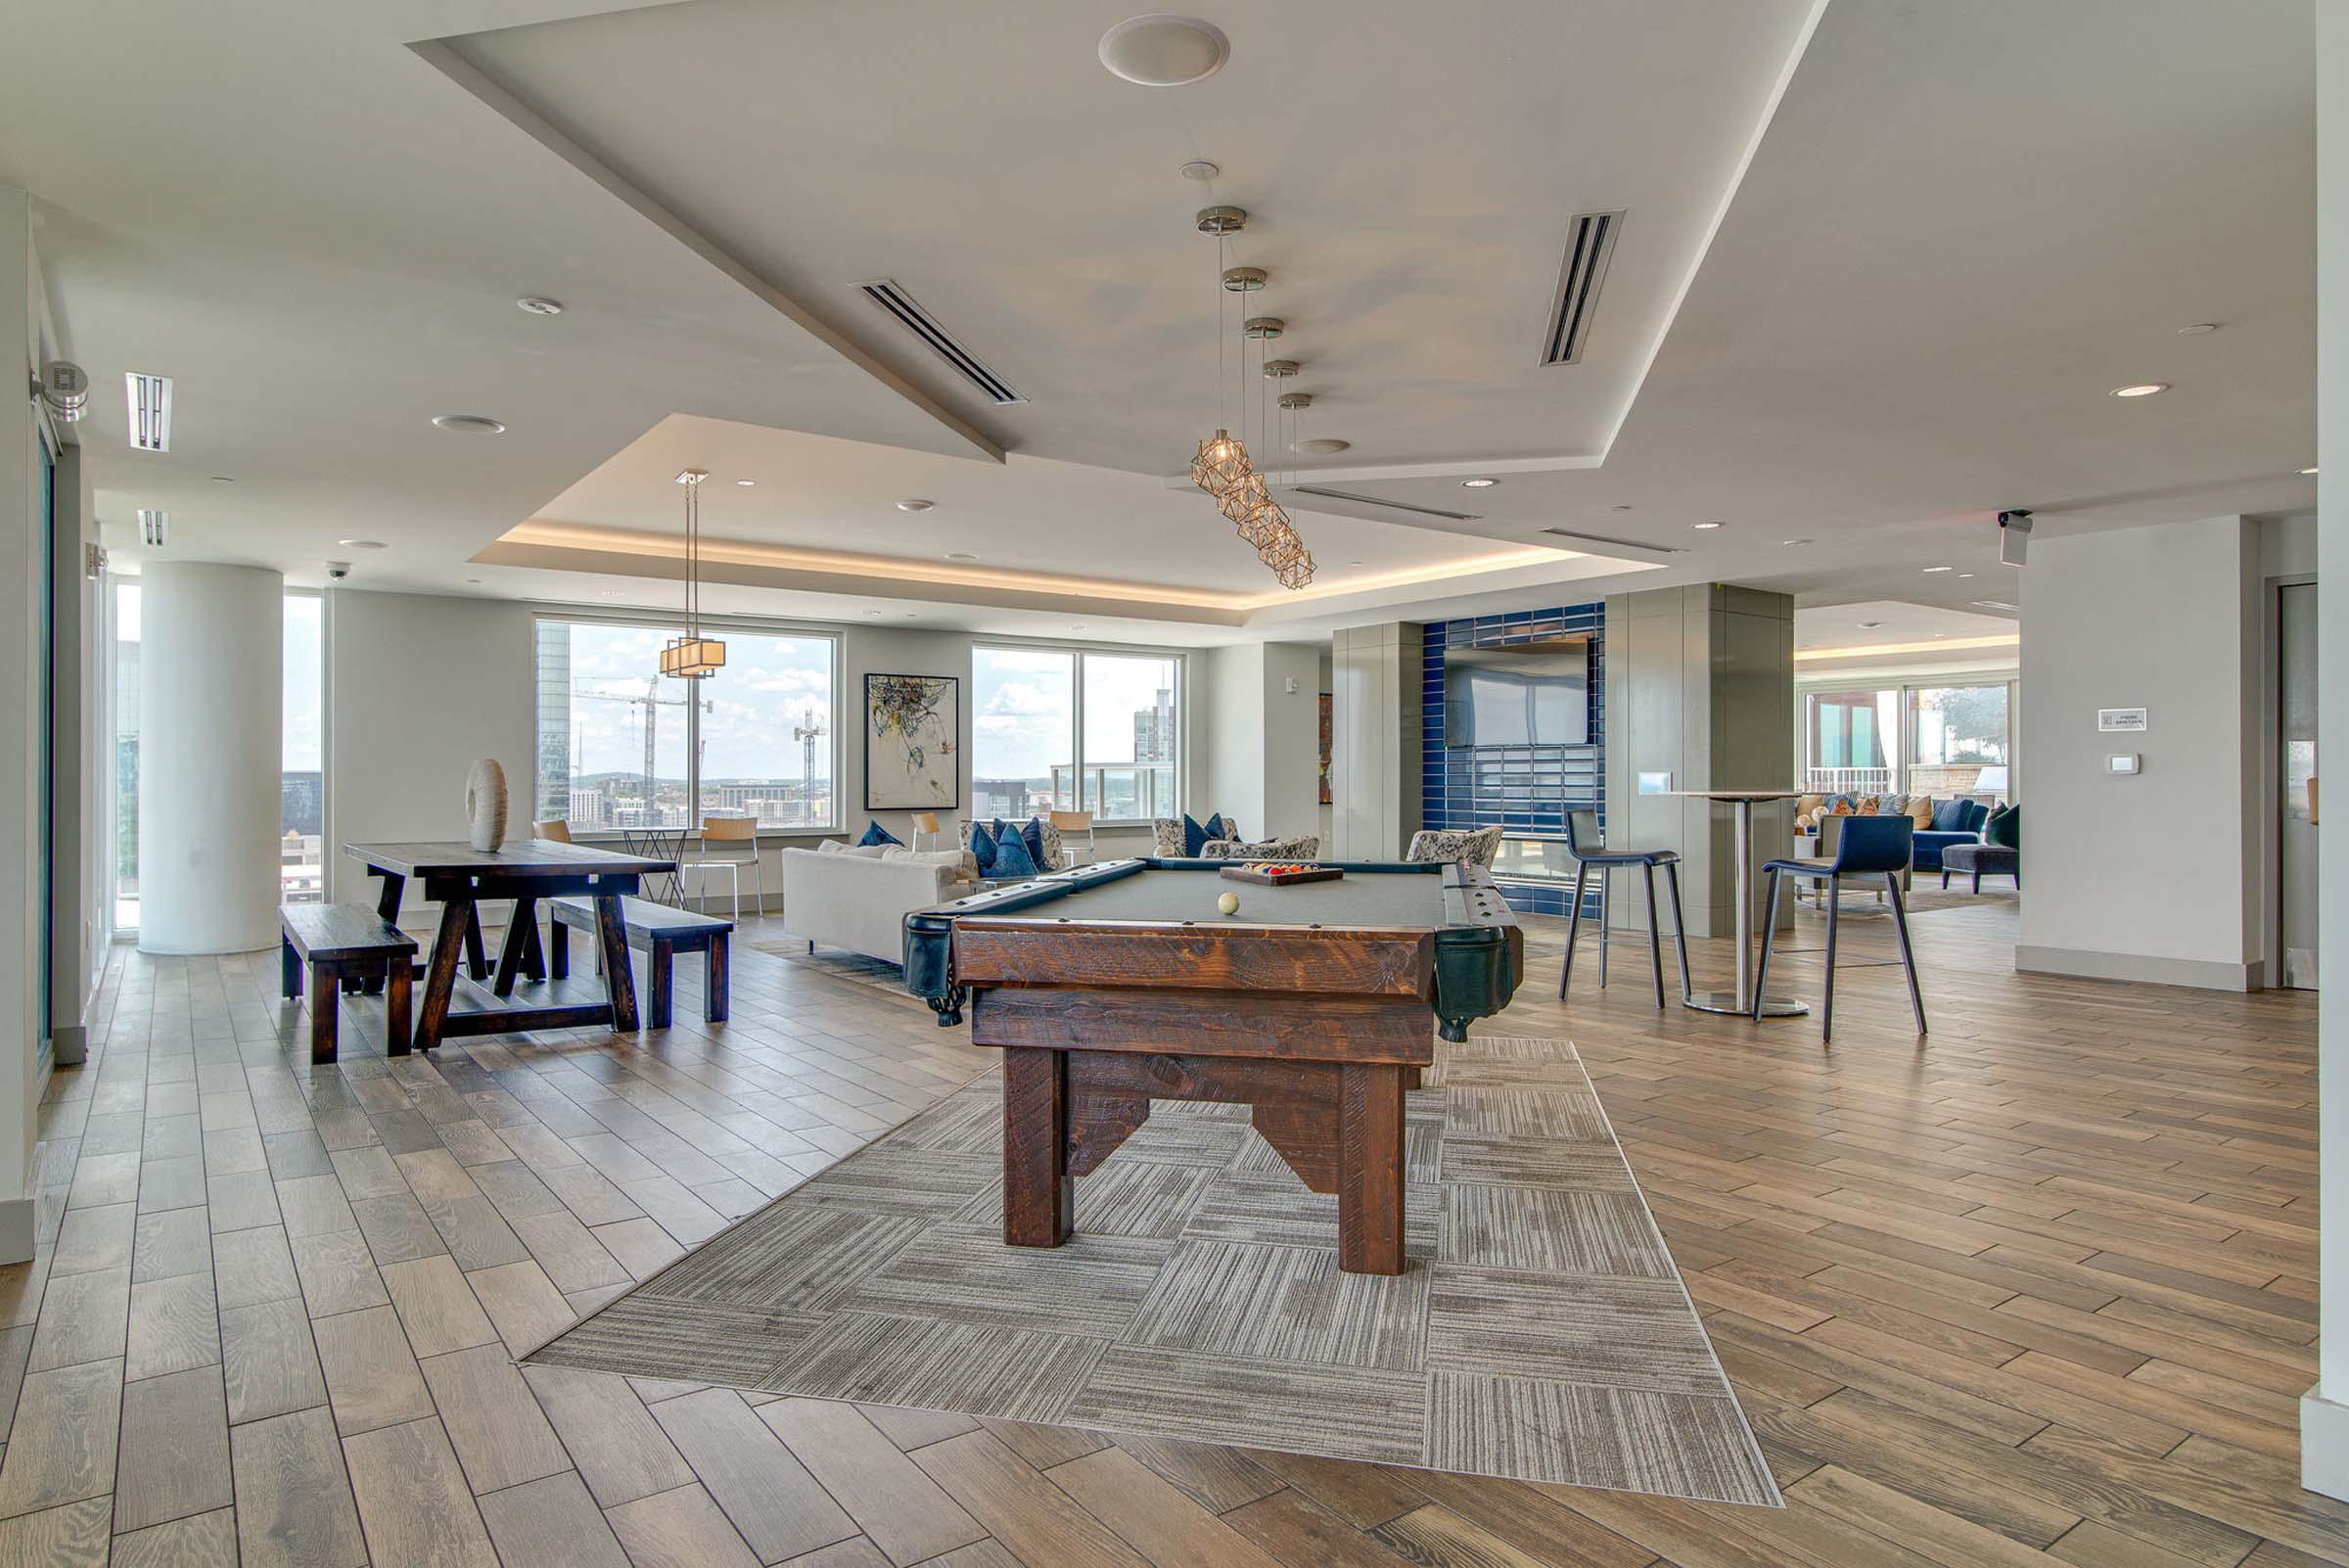 resident clubroom with pool table and ample seating